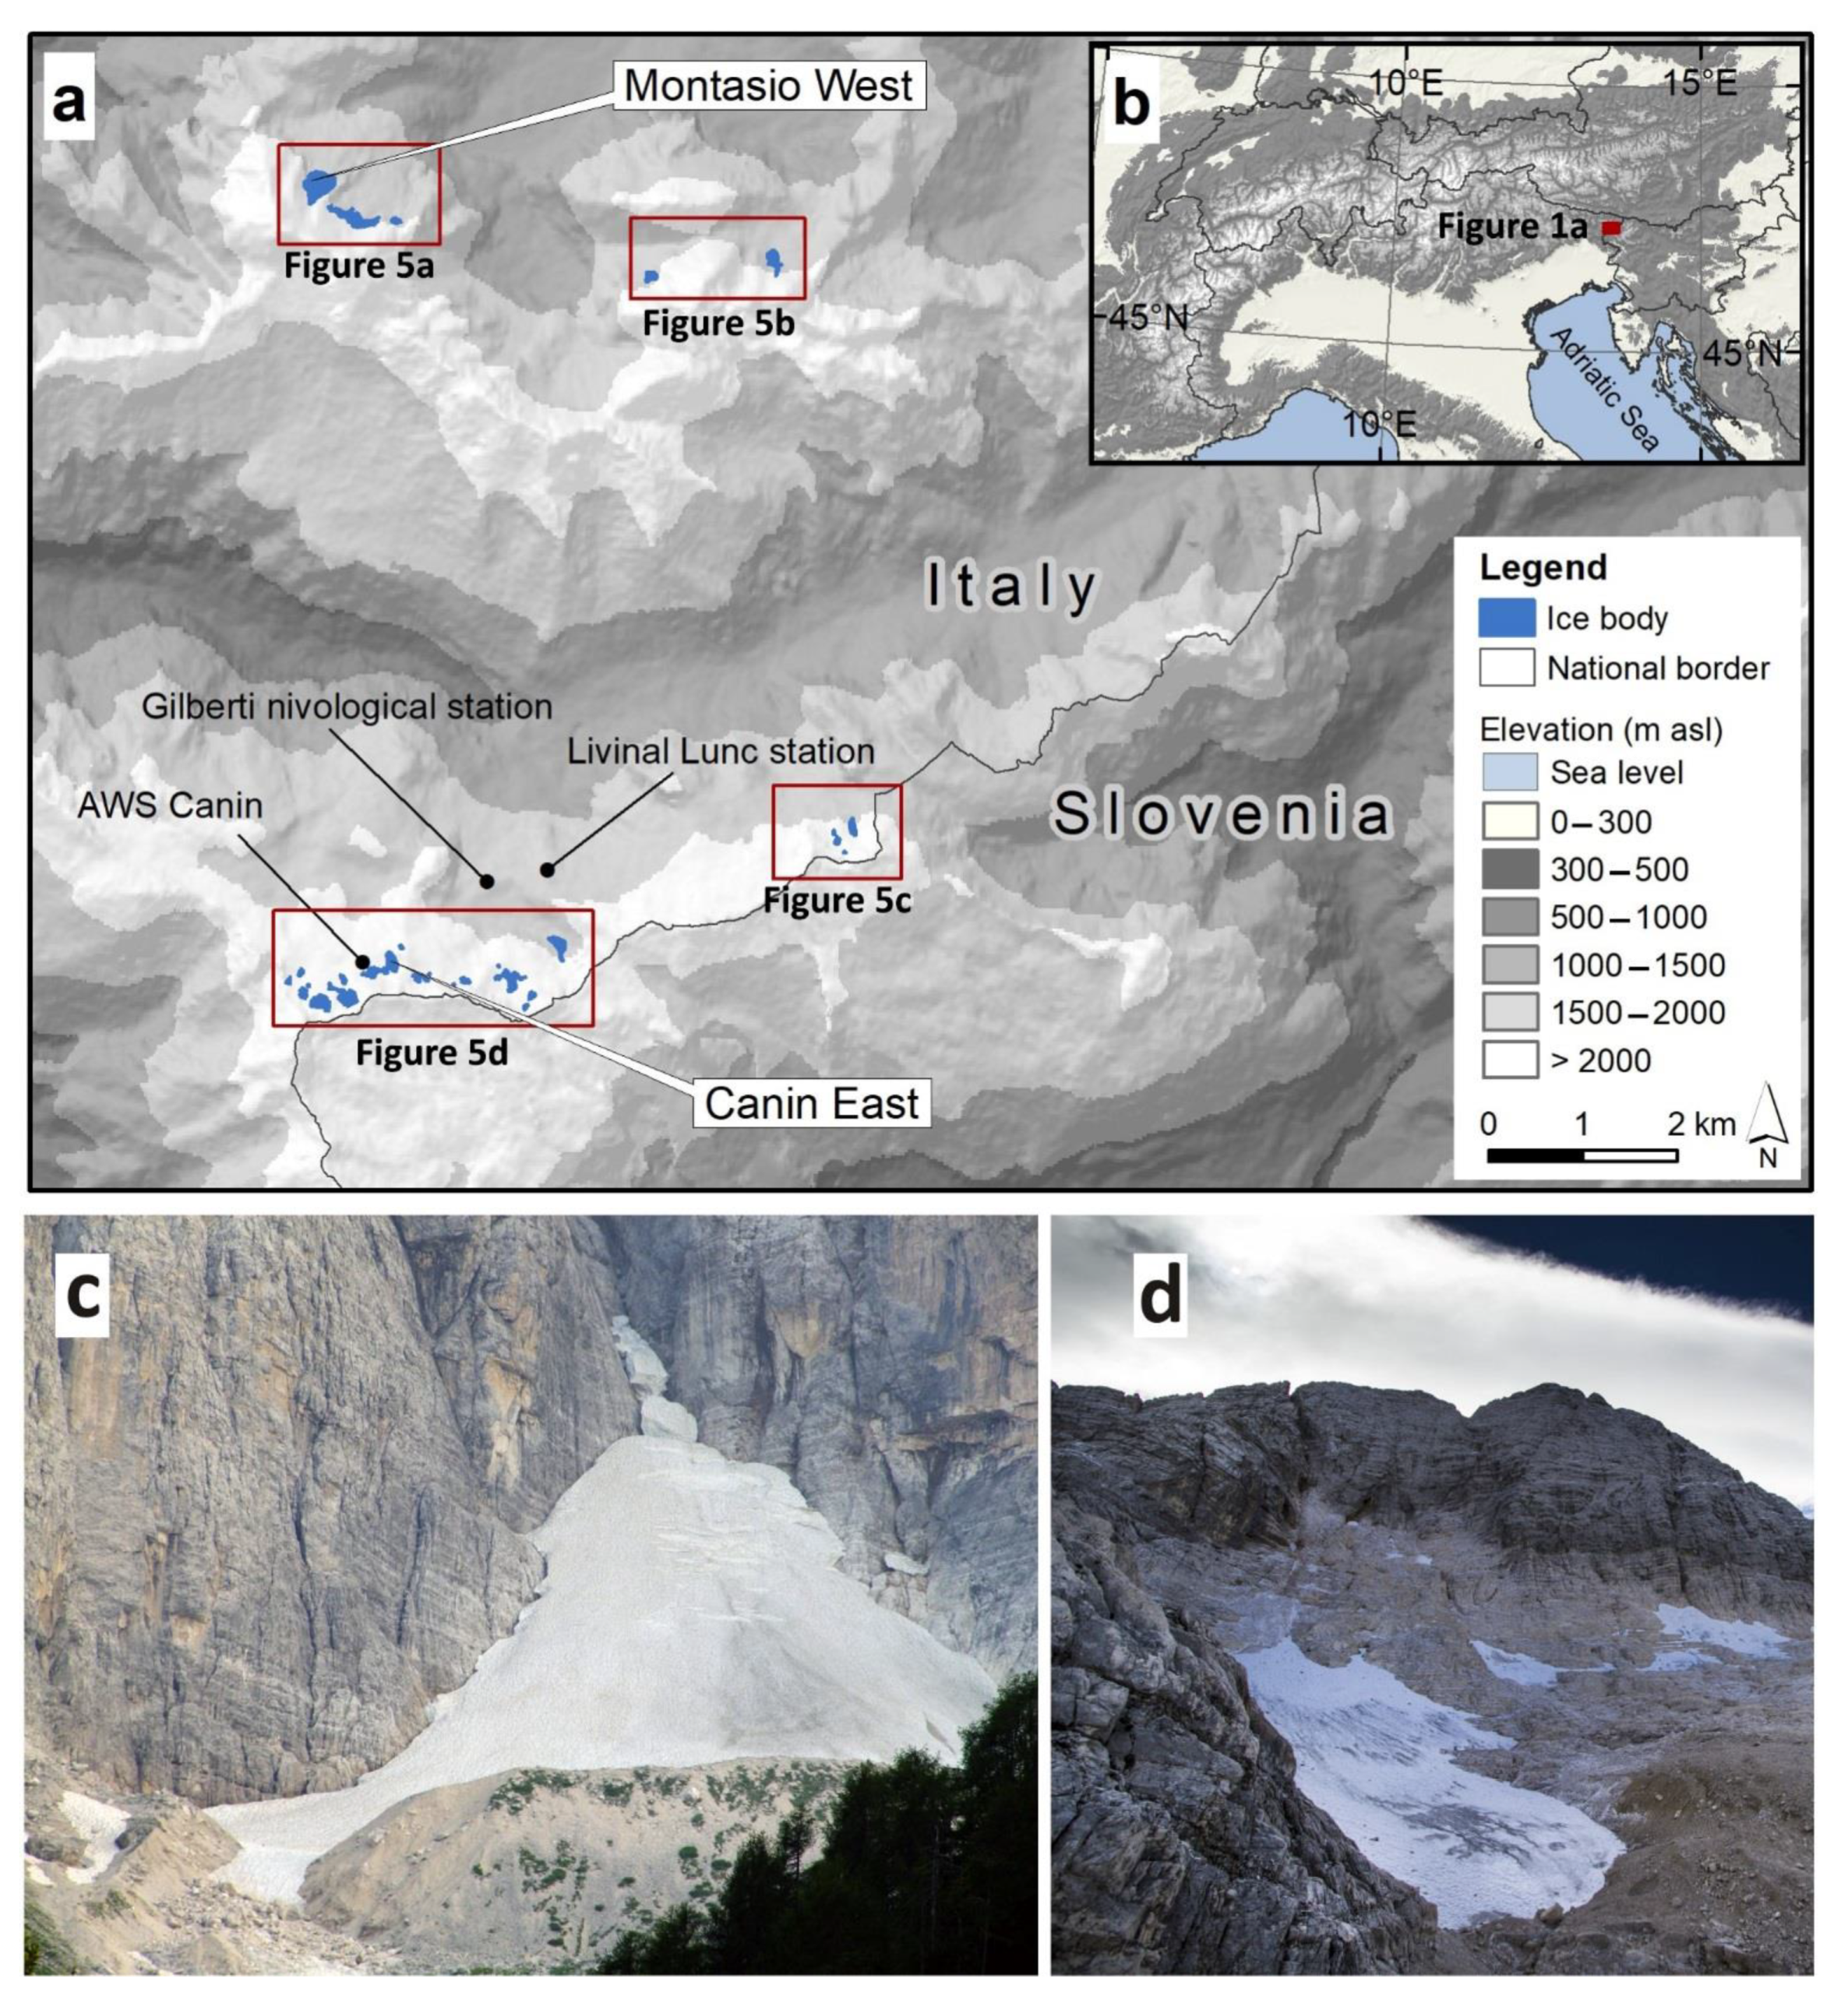 Atmosphere | Free Full-Text | Recent Increases in Winter Snowfall Provide  Resilience to Very Small Glaciers in the Julian Alps, Europe